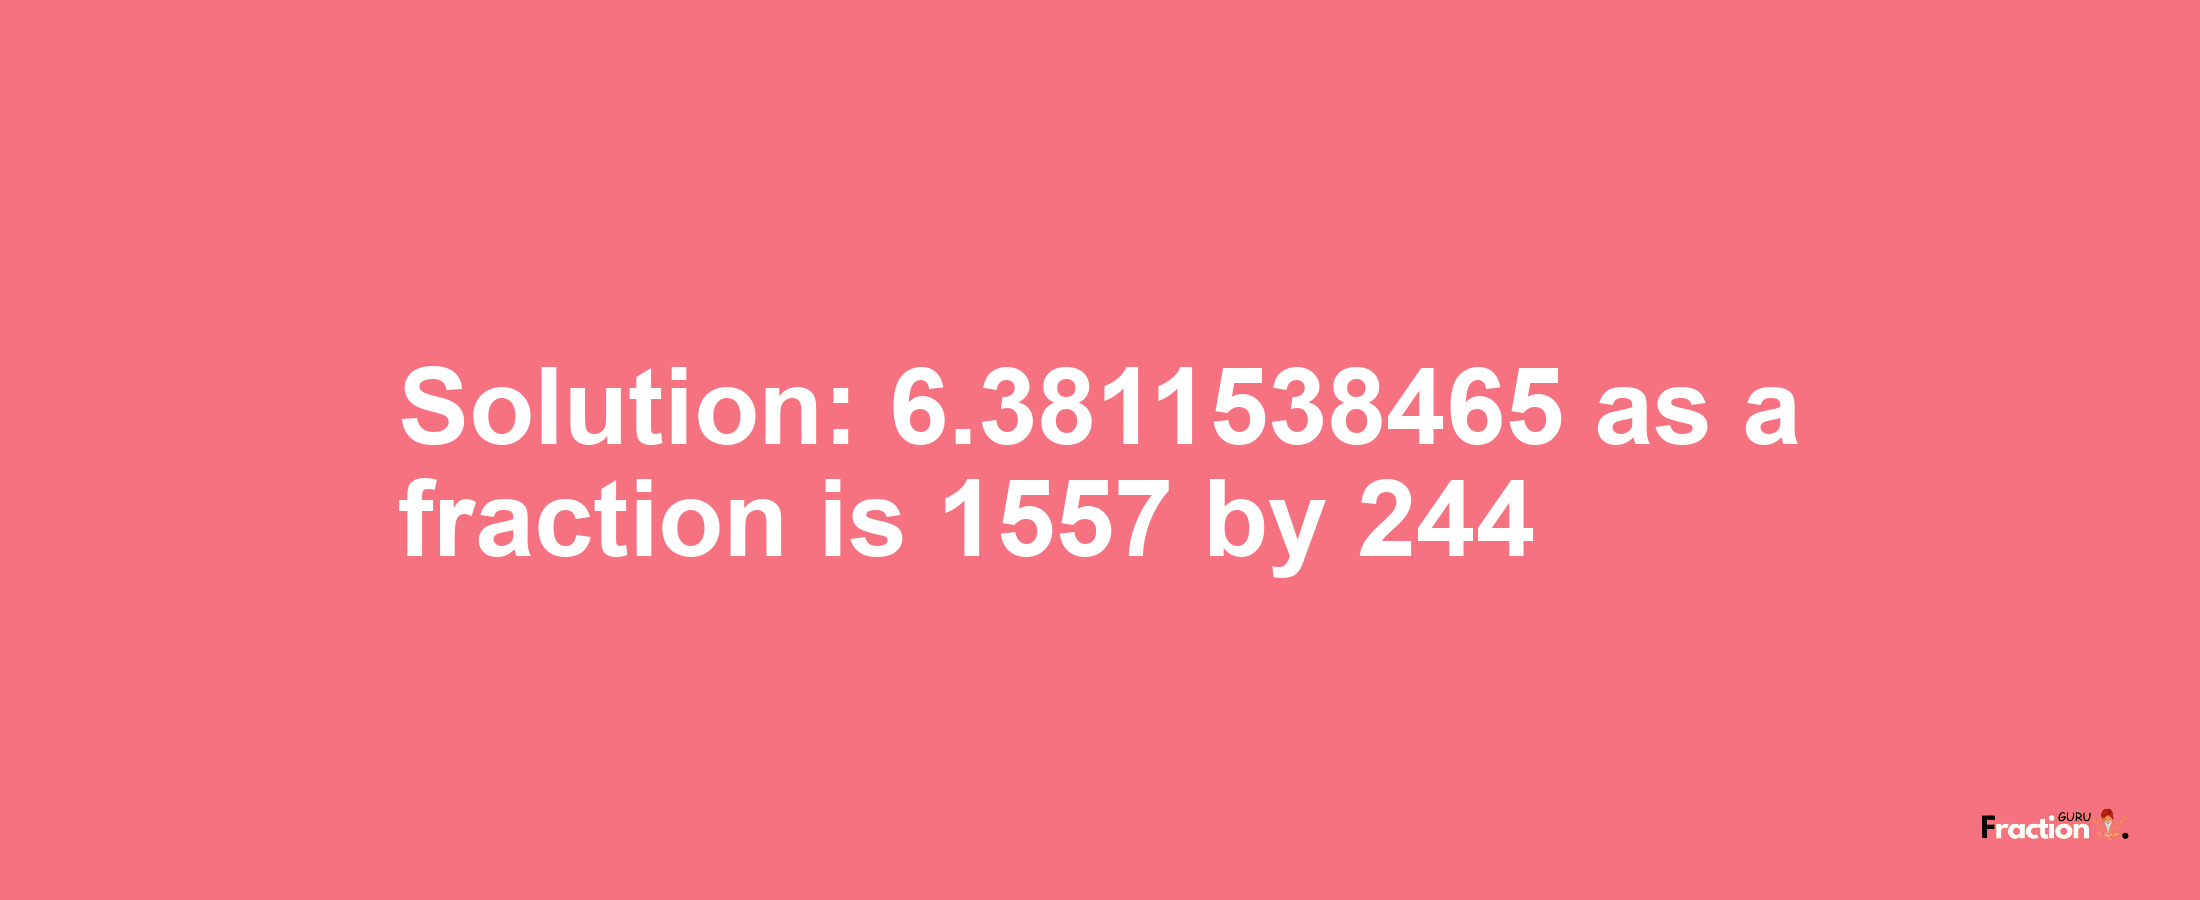 Solution:6.3811538465 as a fraction is 1557/244